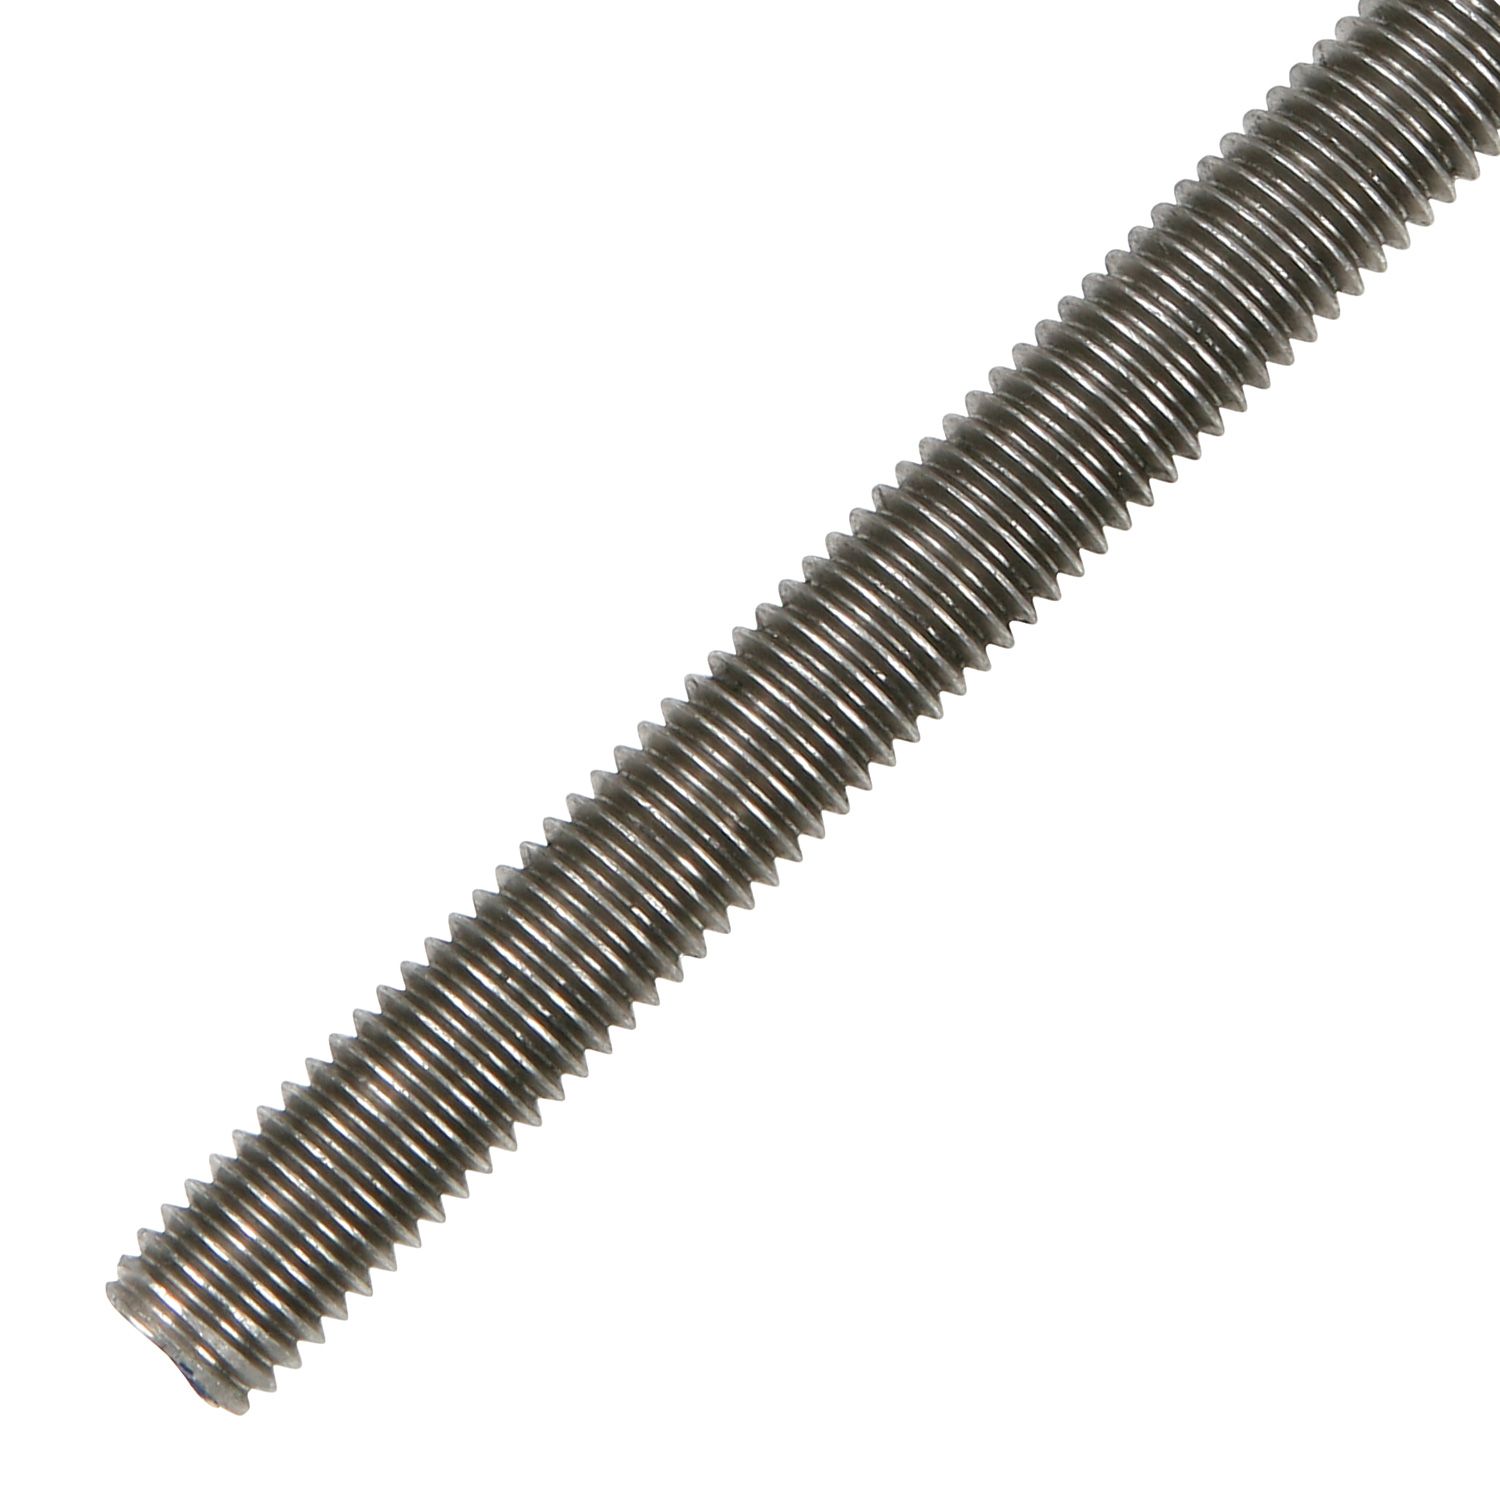 Details about   FABORY 1"-8 X 1 FOOT LENGTH 304 STAINLESS STEEL FULLY THREADED ROD **4-PACK** 